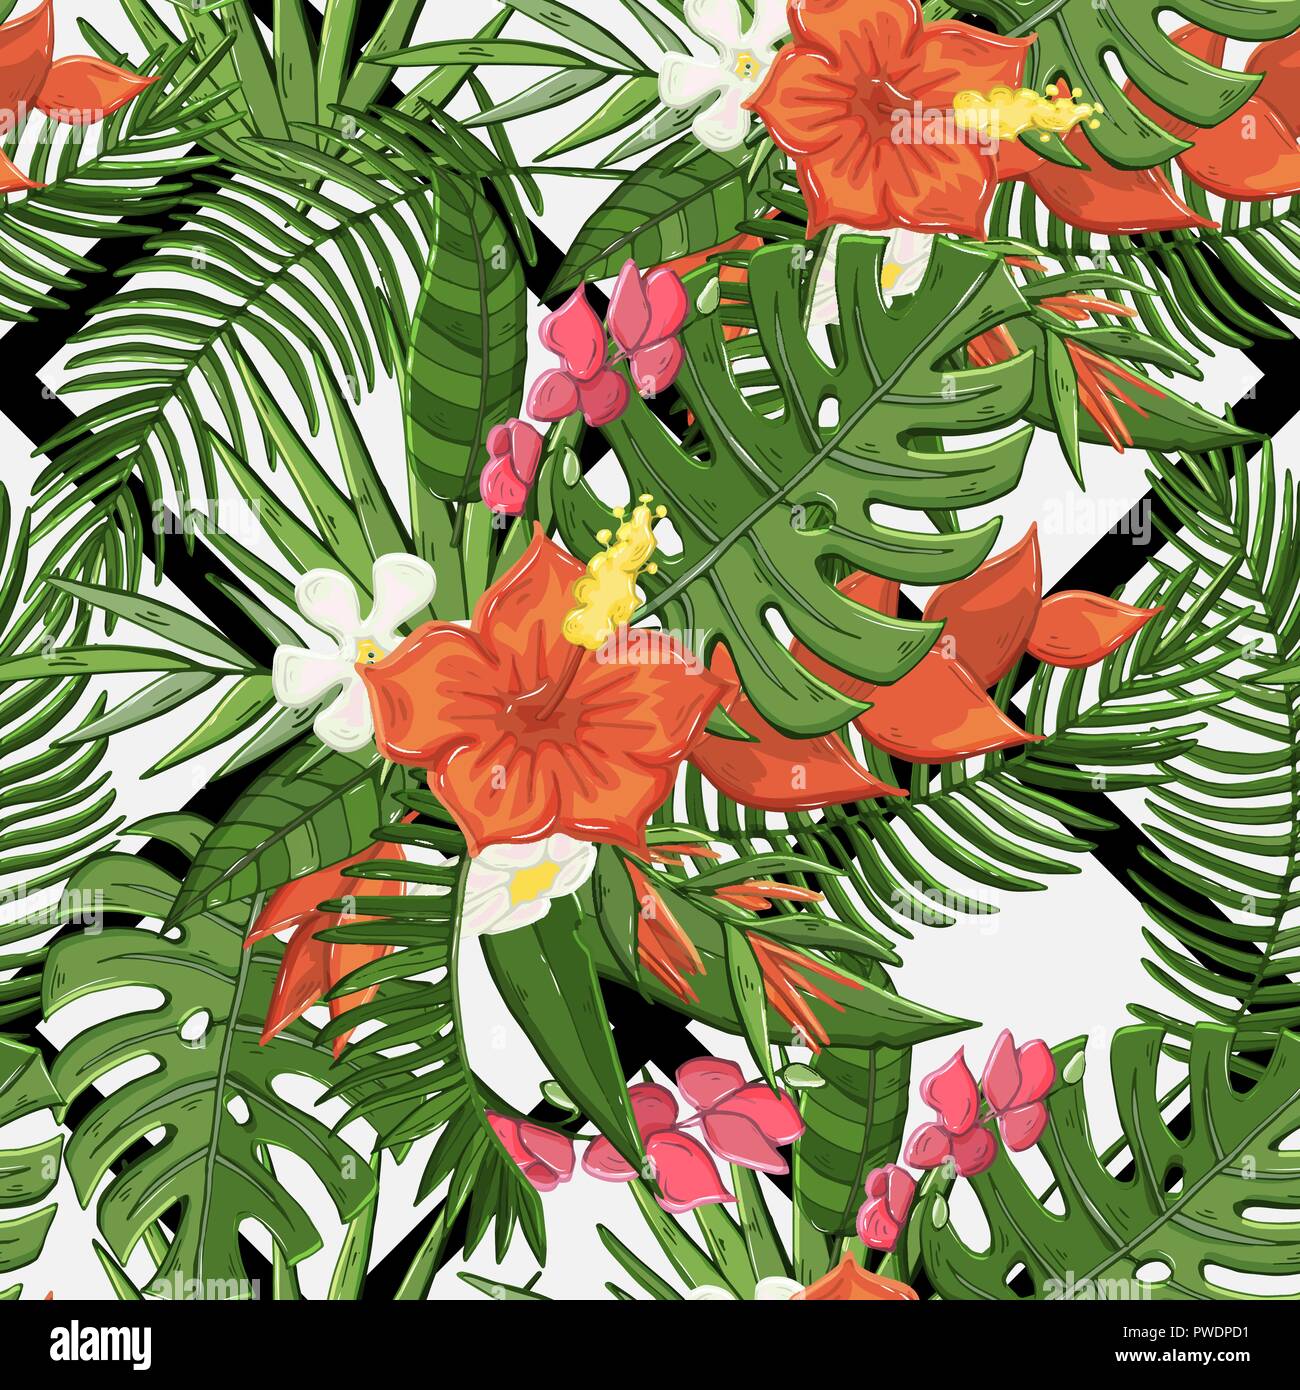 Vector seamless flowers pattern with tropical plants Stock Vector